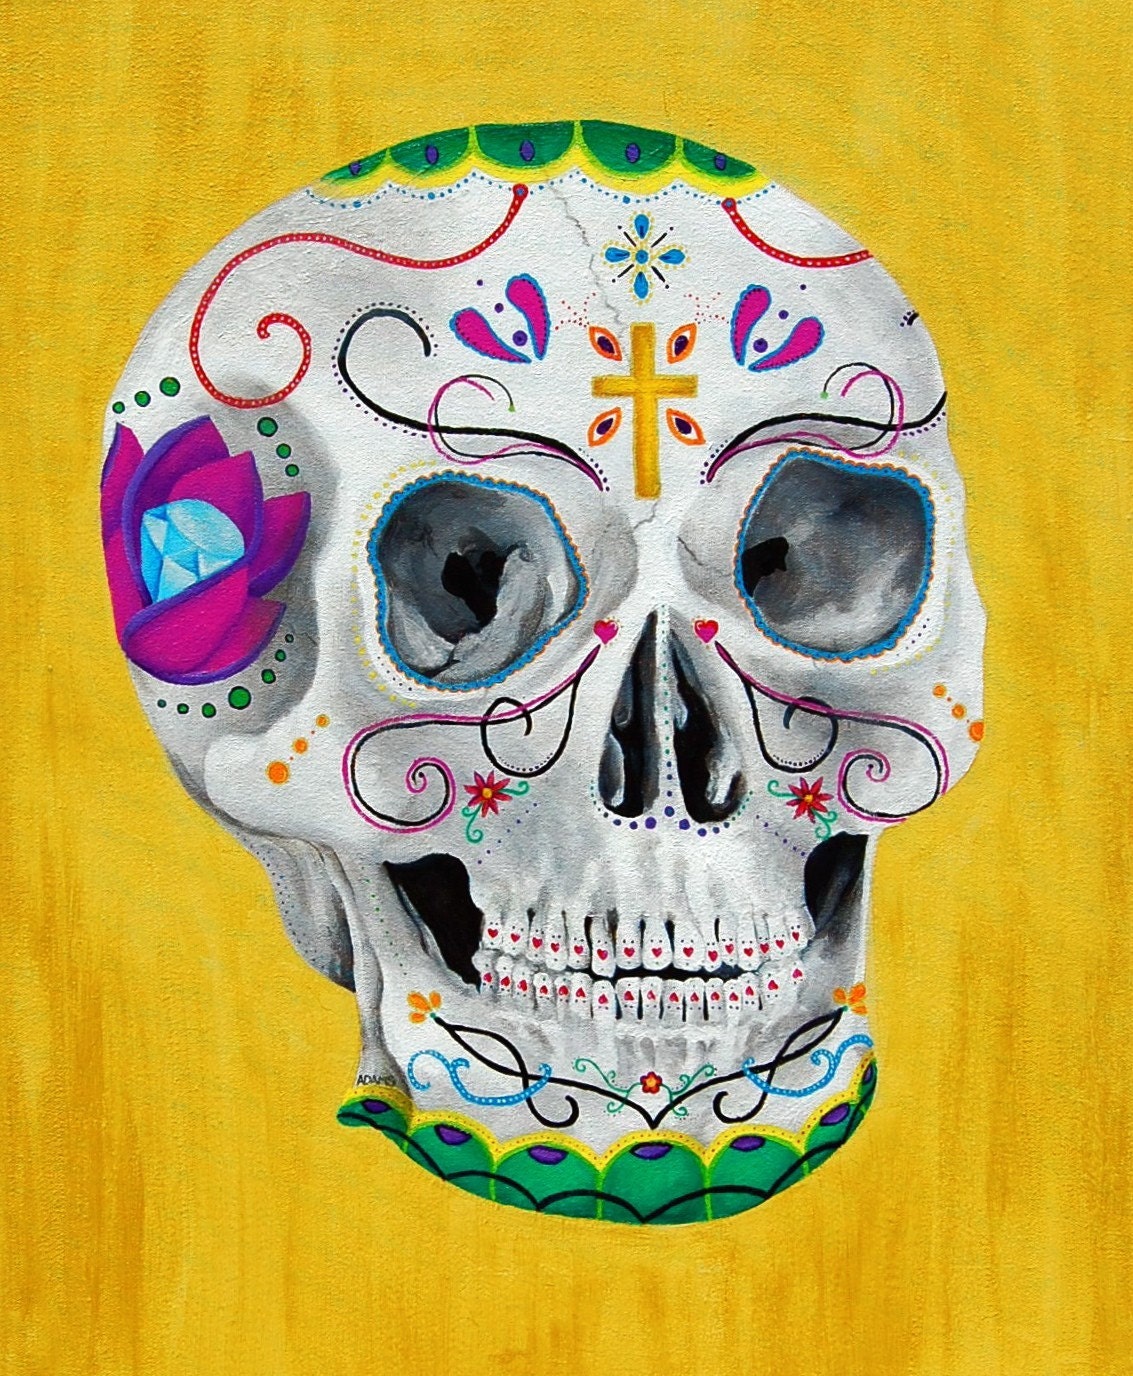 PRINT of Original Day of the Dead Sugar Skull Painting